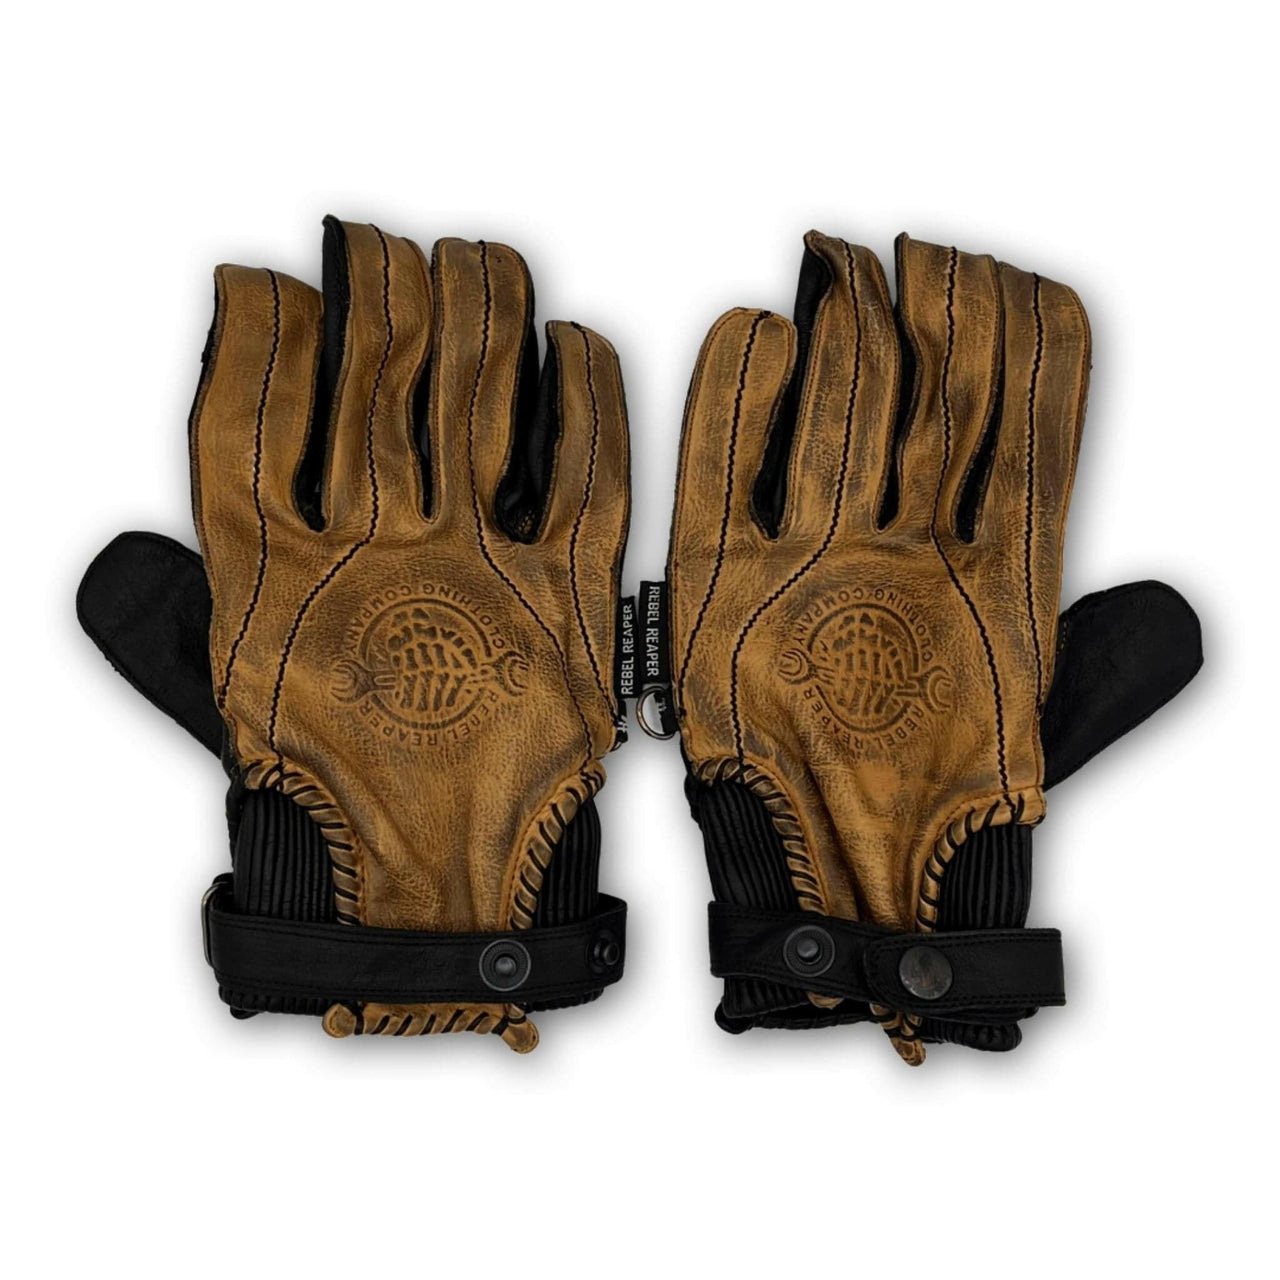 Leather Motorcycle Riding Gloves - Modern Roper - Distressed Brown